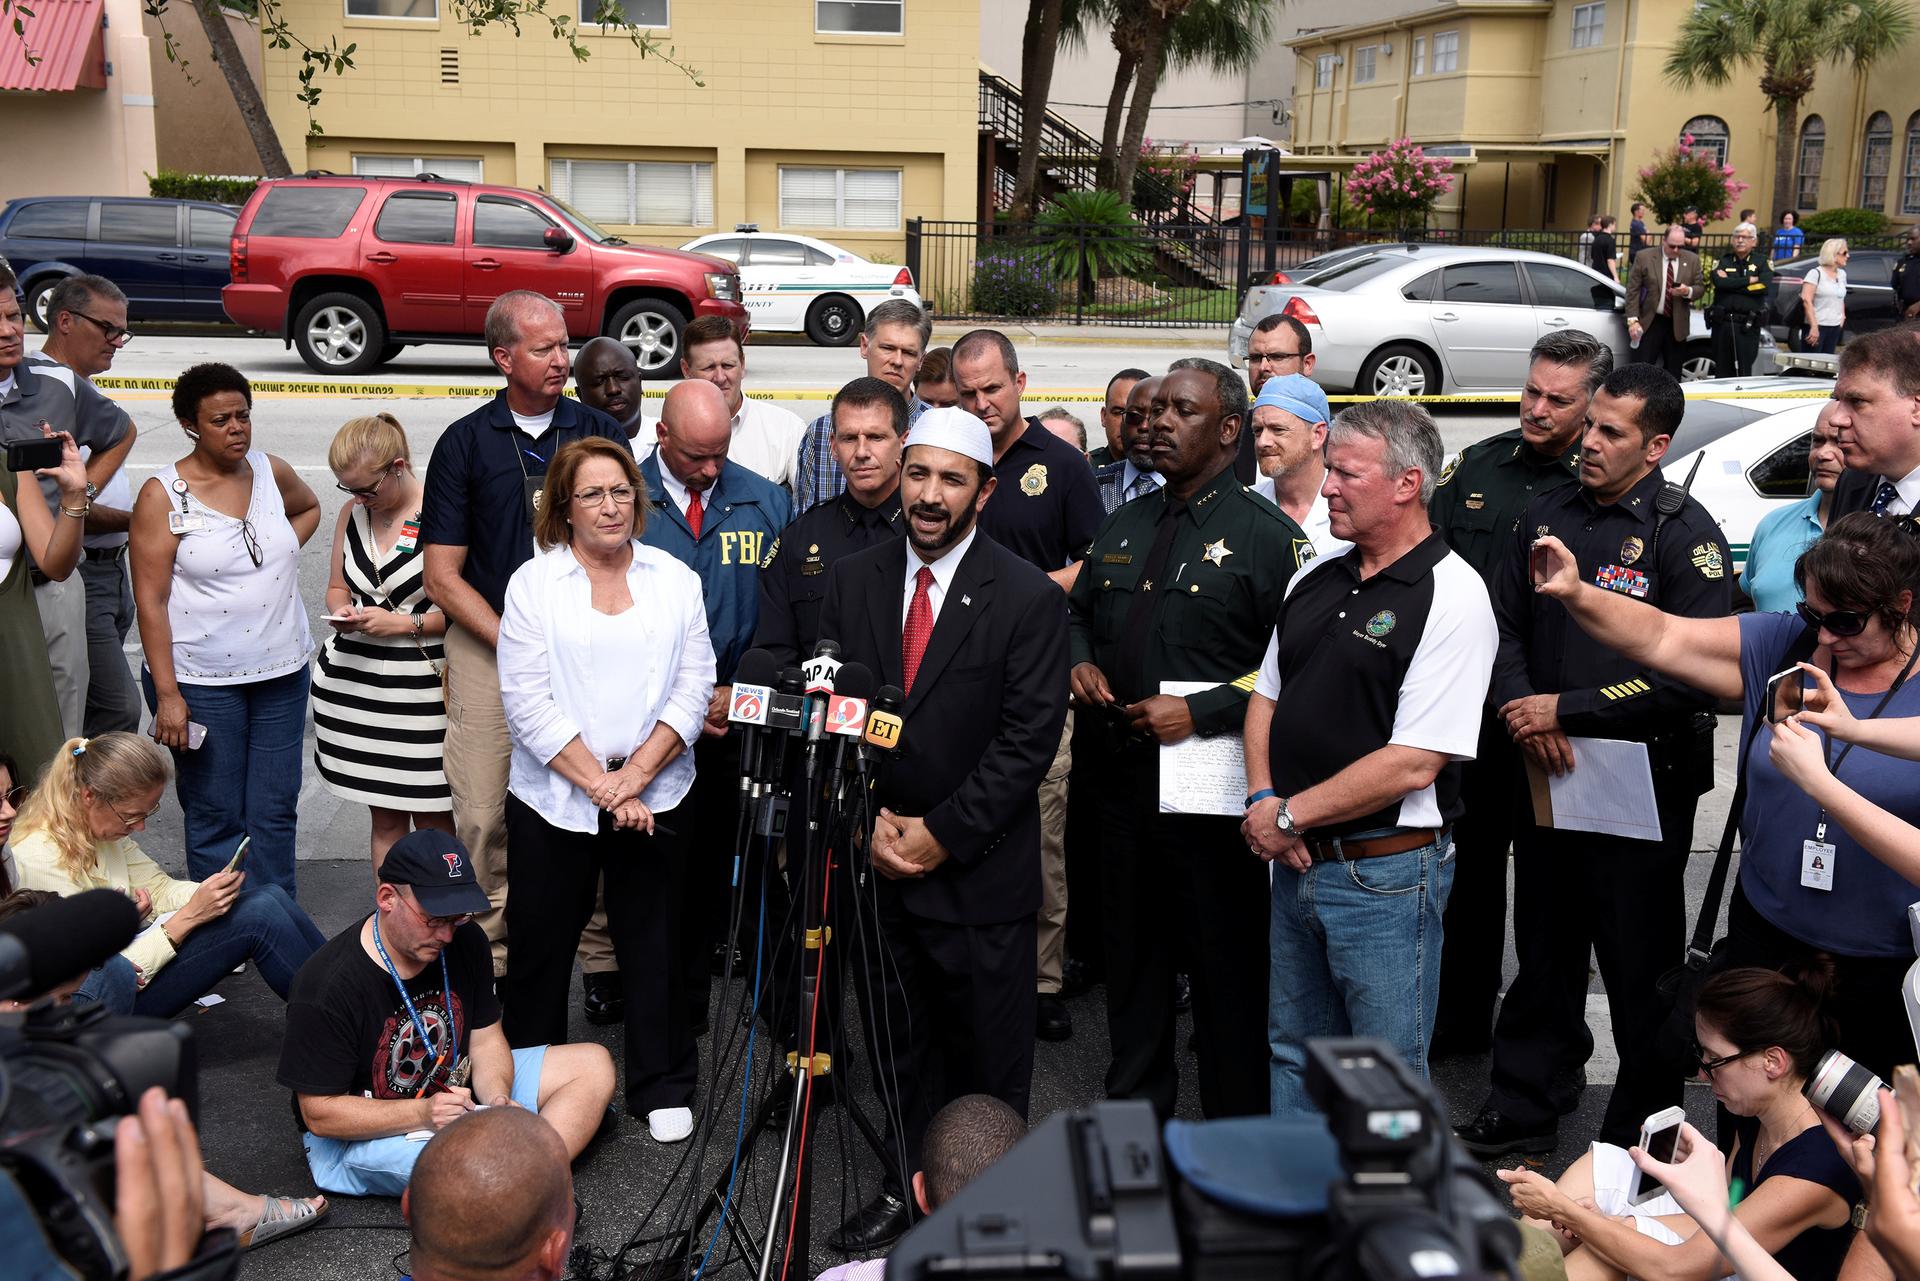 Imam Muhammad Musri speaks at a news conference